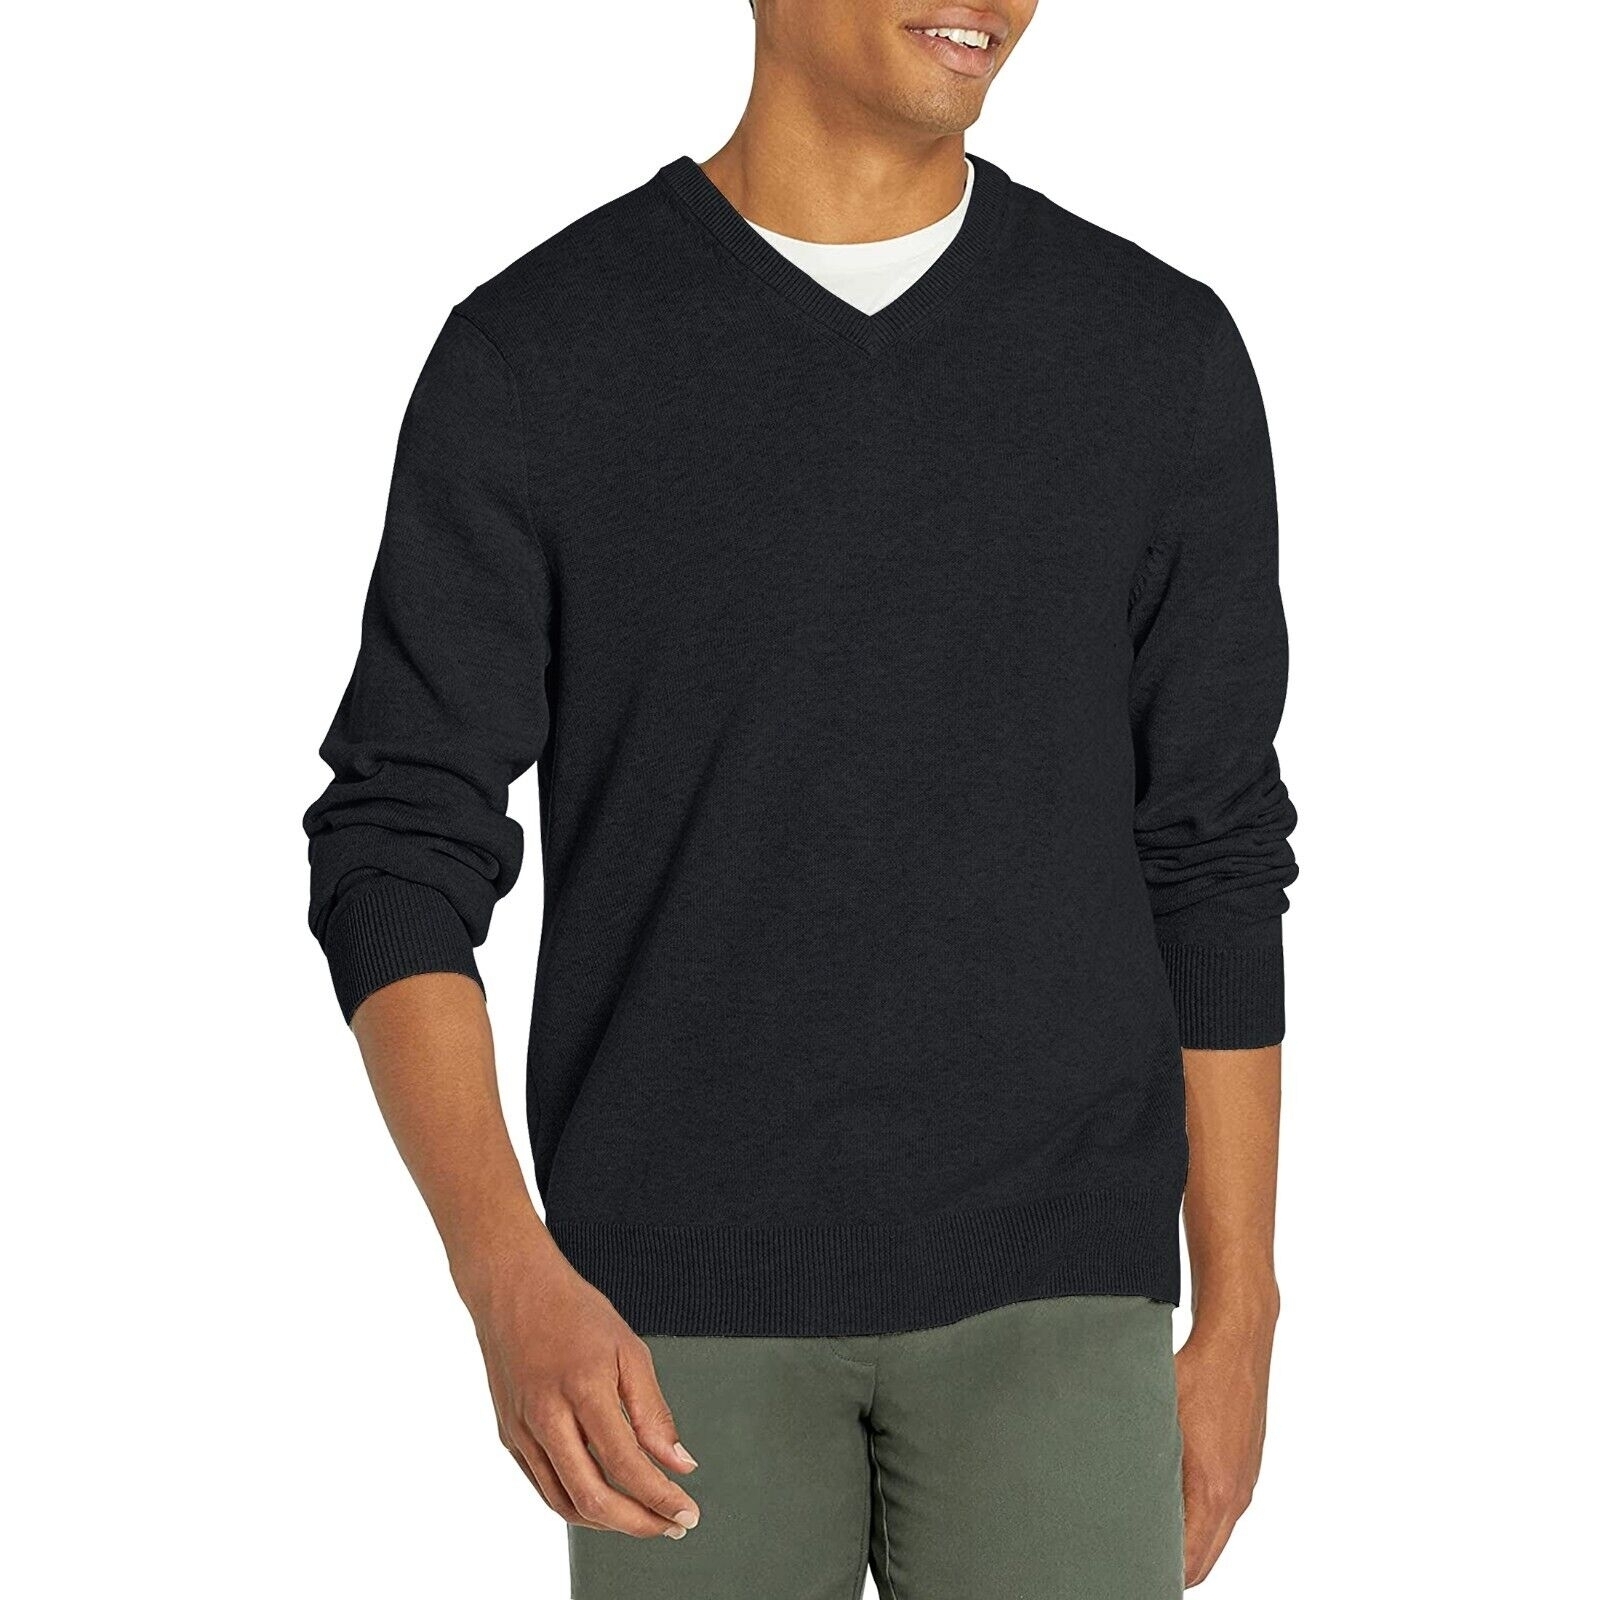 Men's Casual Ultra-Soft Slim Fit Warm Knit Pullover V-Neck Sweater For Winter - Black, Small